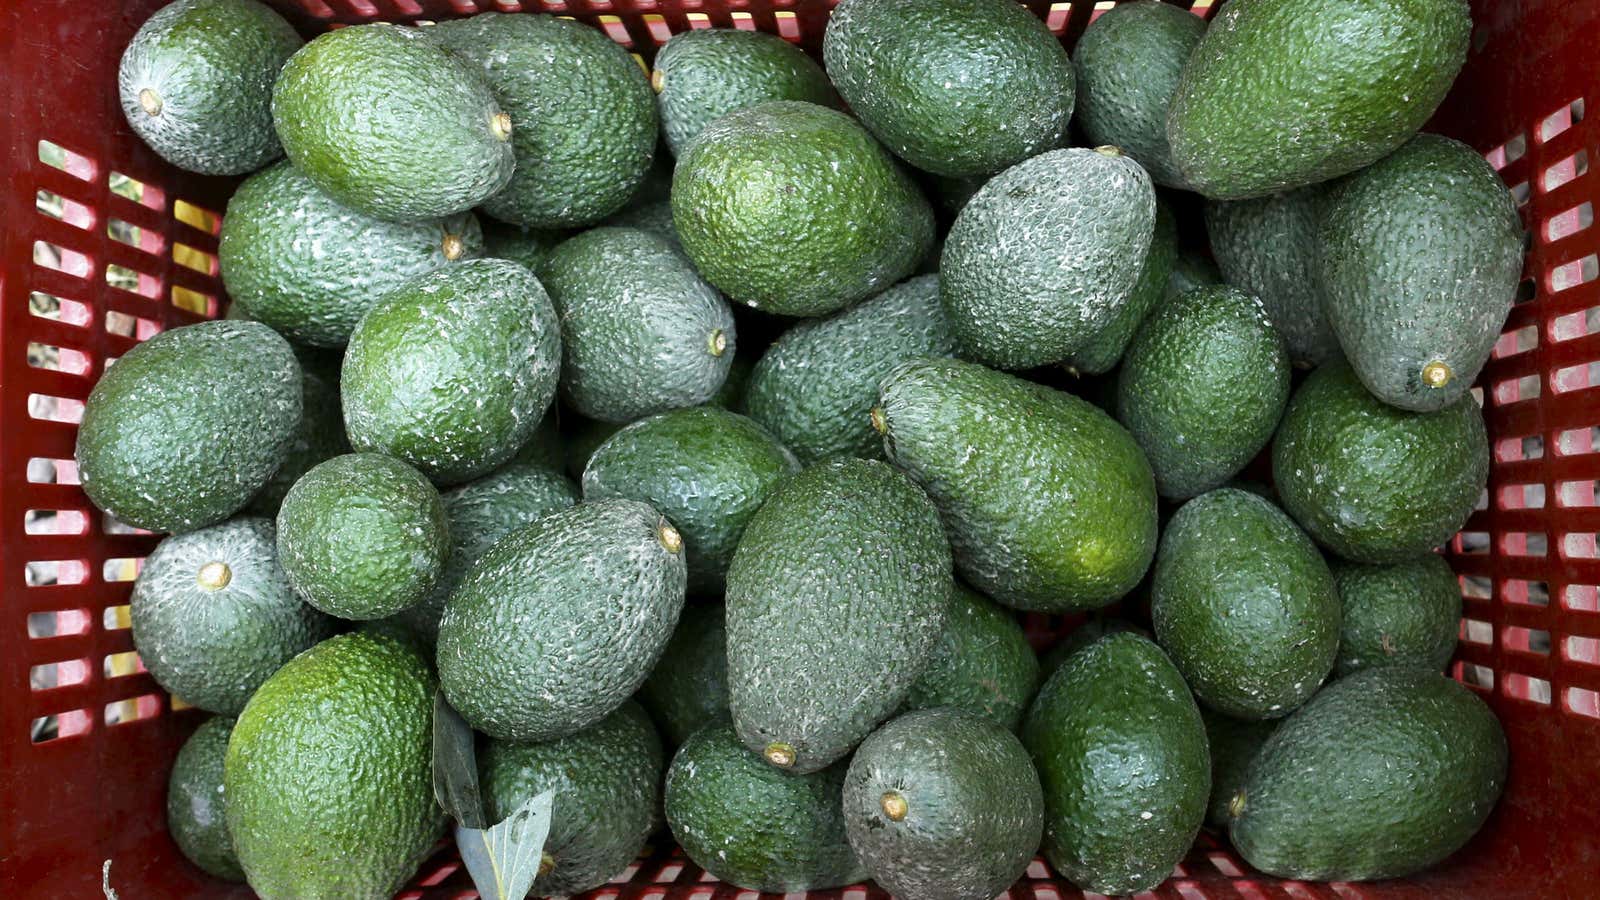 In the US, Avocados followed a classic path to mainstream adoption.